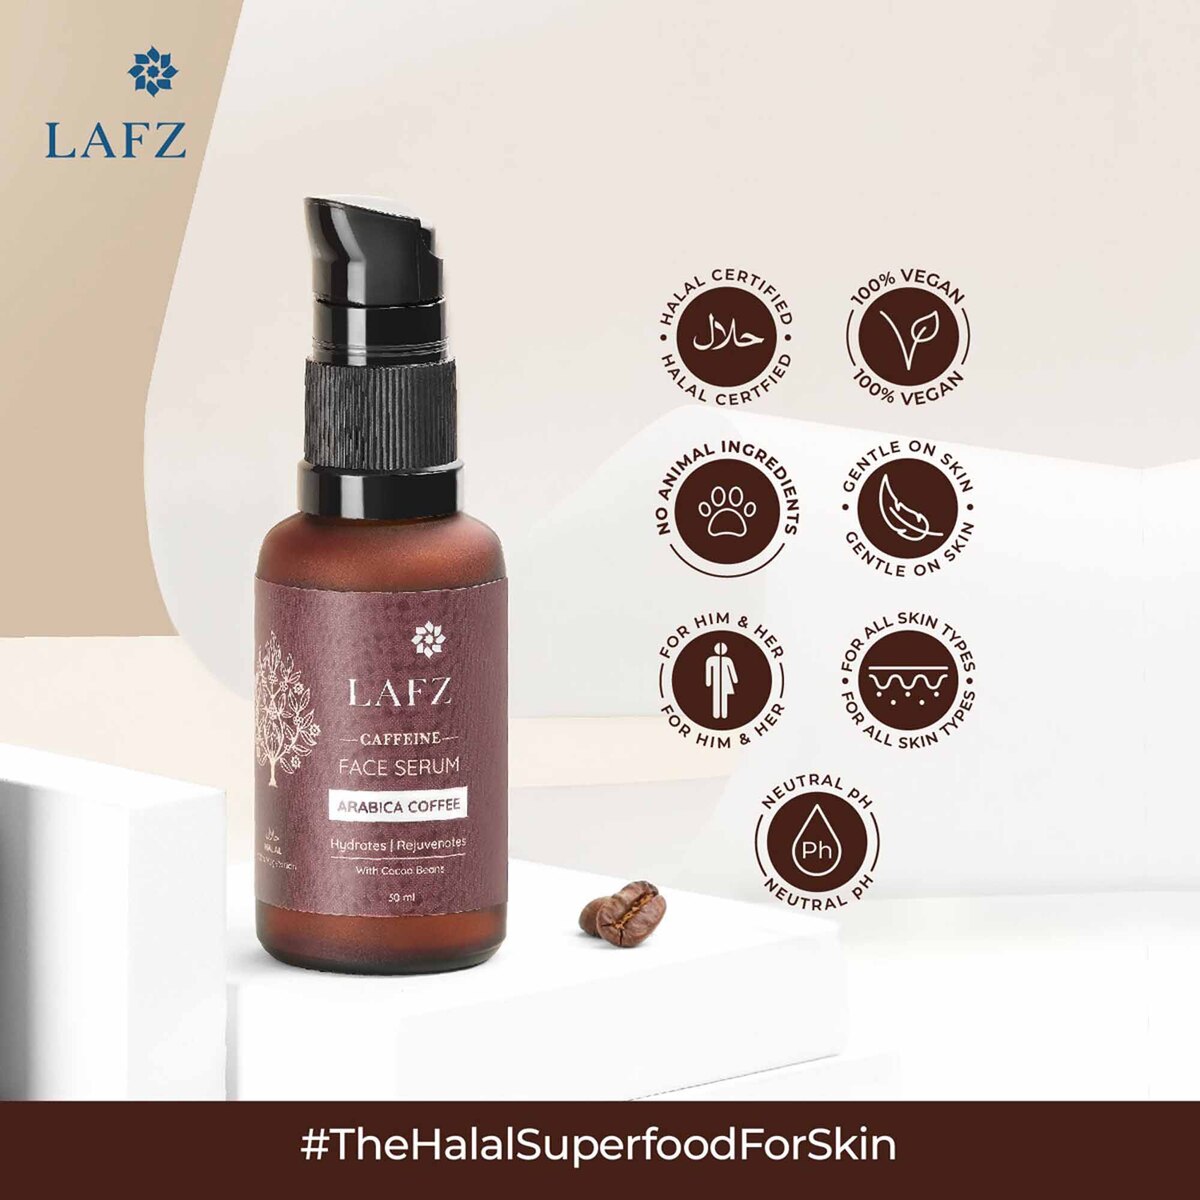 Lafz Coffee Face Serum, Enriched with Arabica Coffee and Cocoa Beans, Exfoliates, Brightens Skin, Halal & Vegan, For All Skin Types, 30 ml